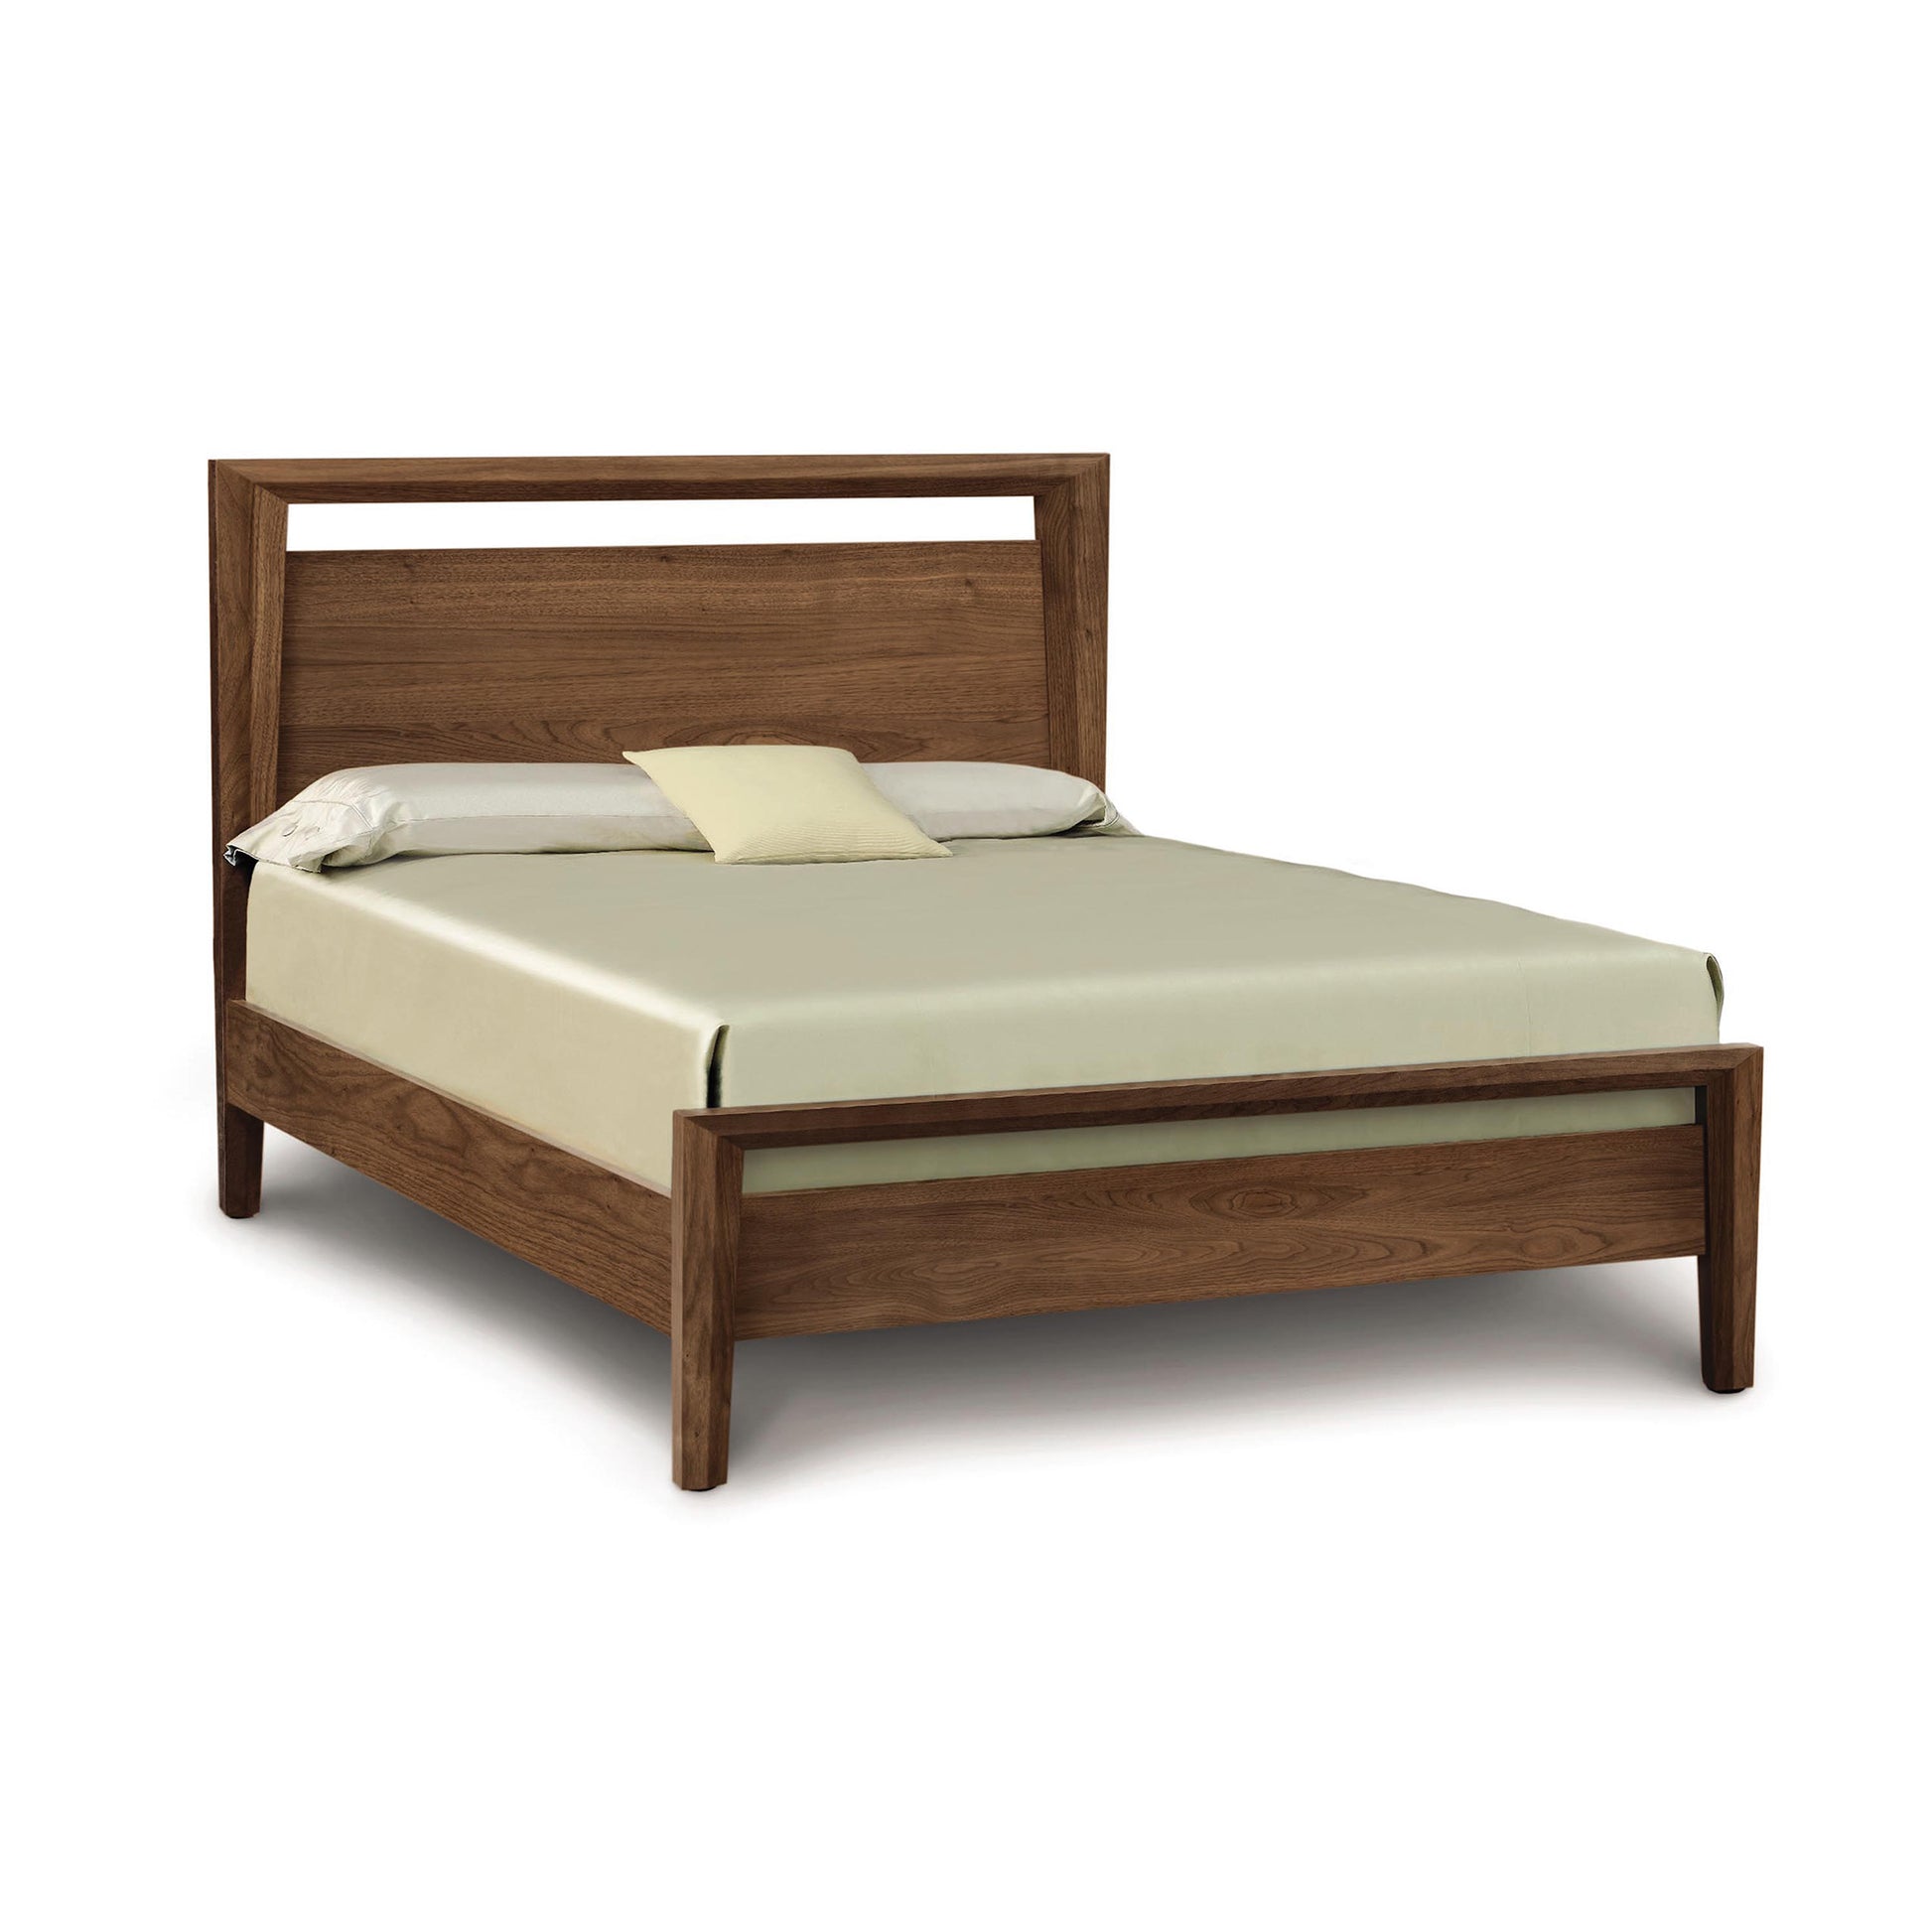 A solid natural Mansfield Walnut Platform Bed in the Arts & Crafts style, with a headboard, supporting a mattress with neatly arranged bedding, isolated against a white background. (Brand Name: Copeland Furniture)